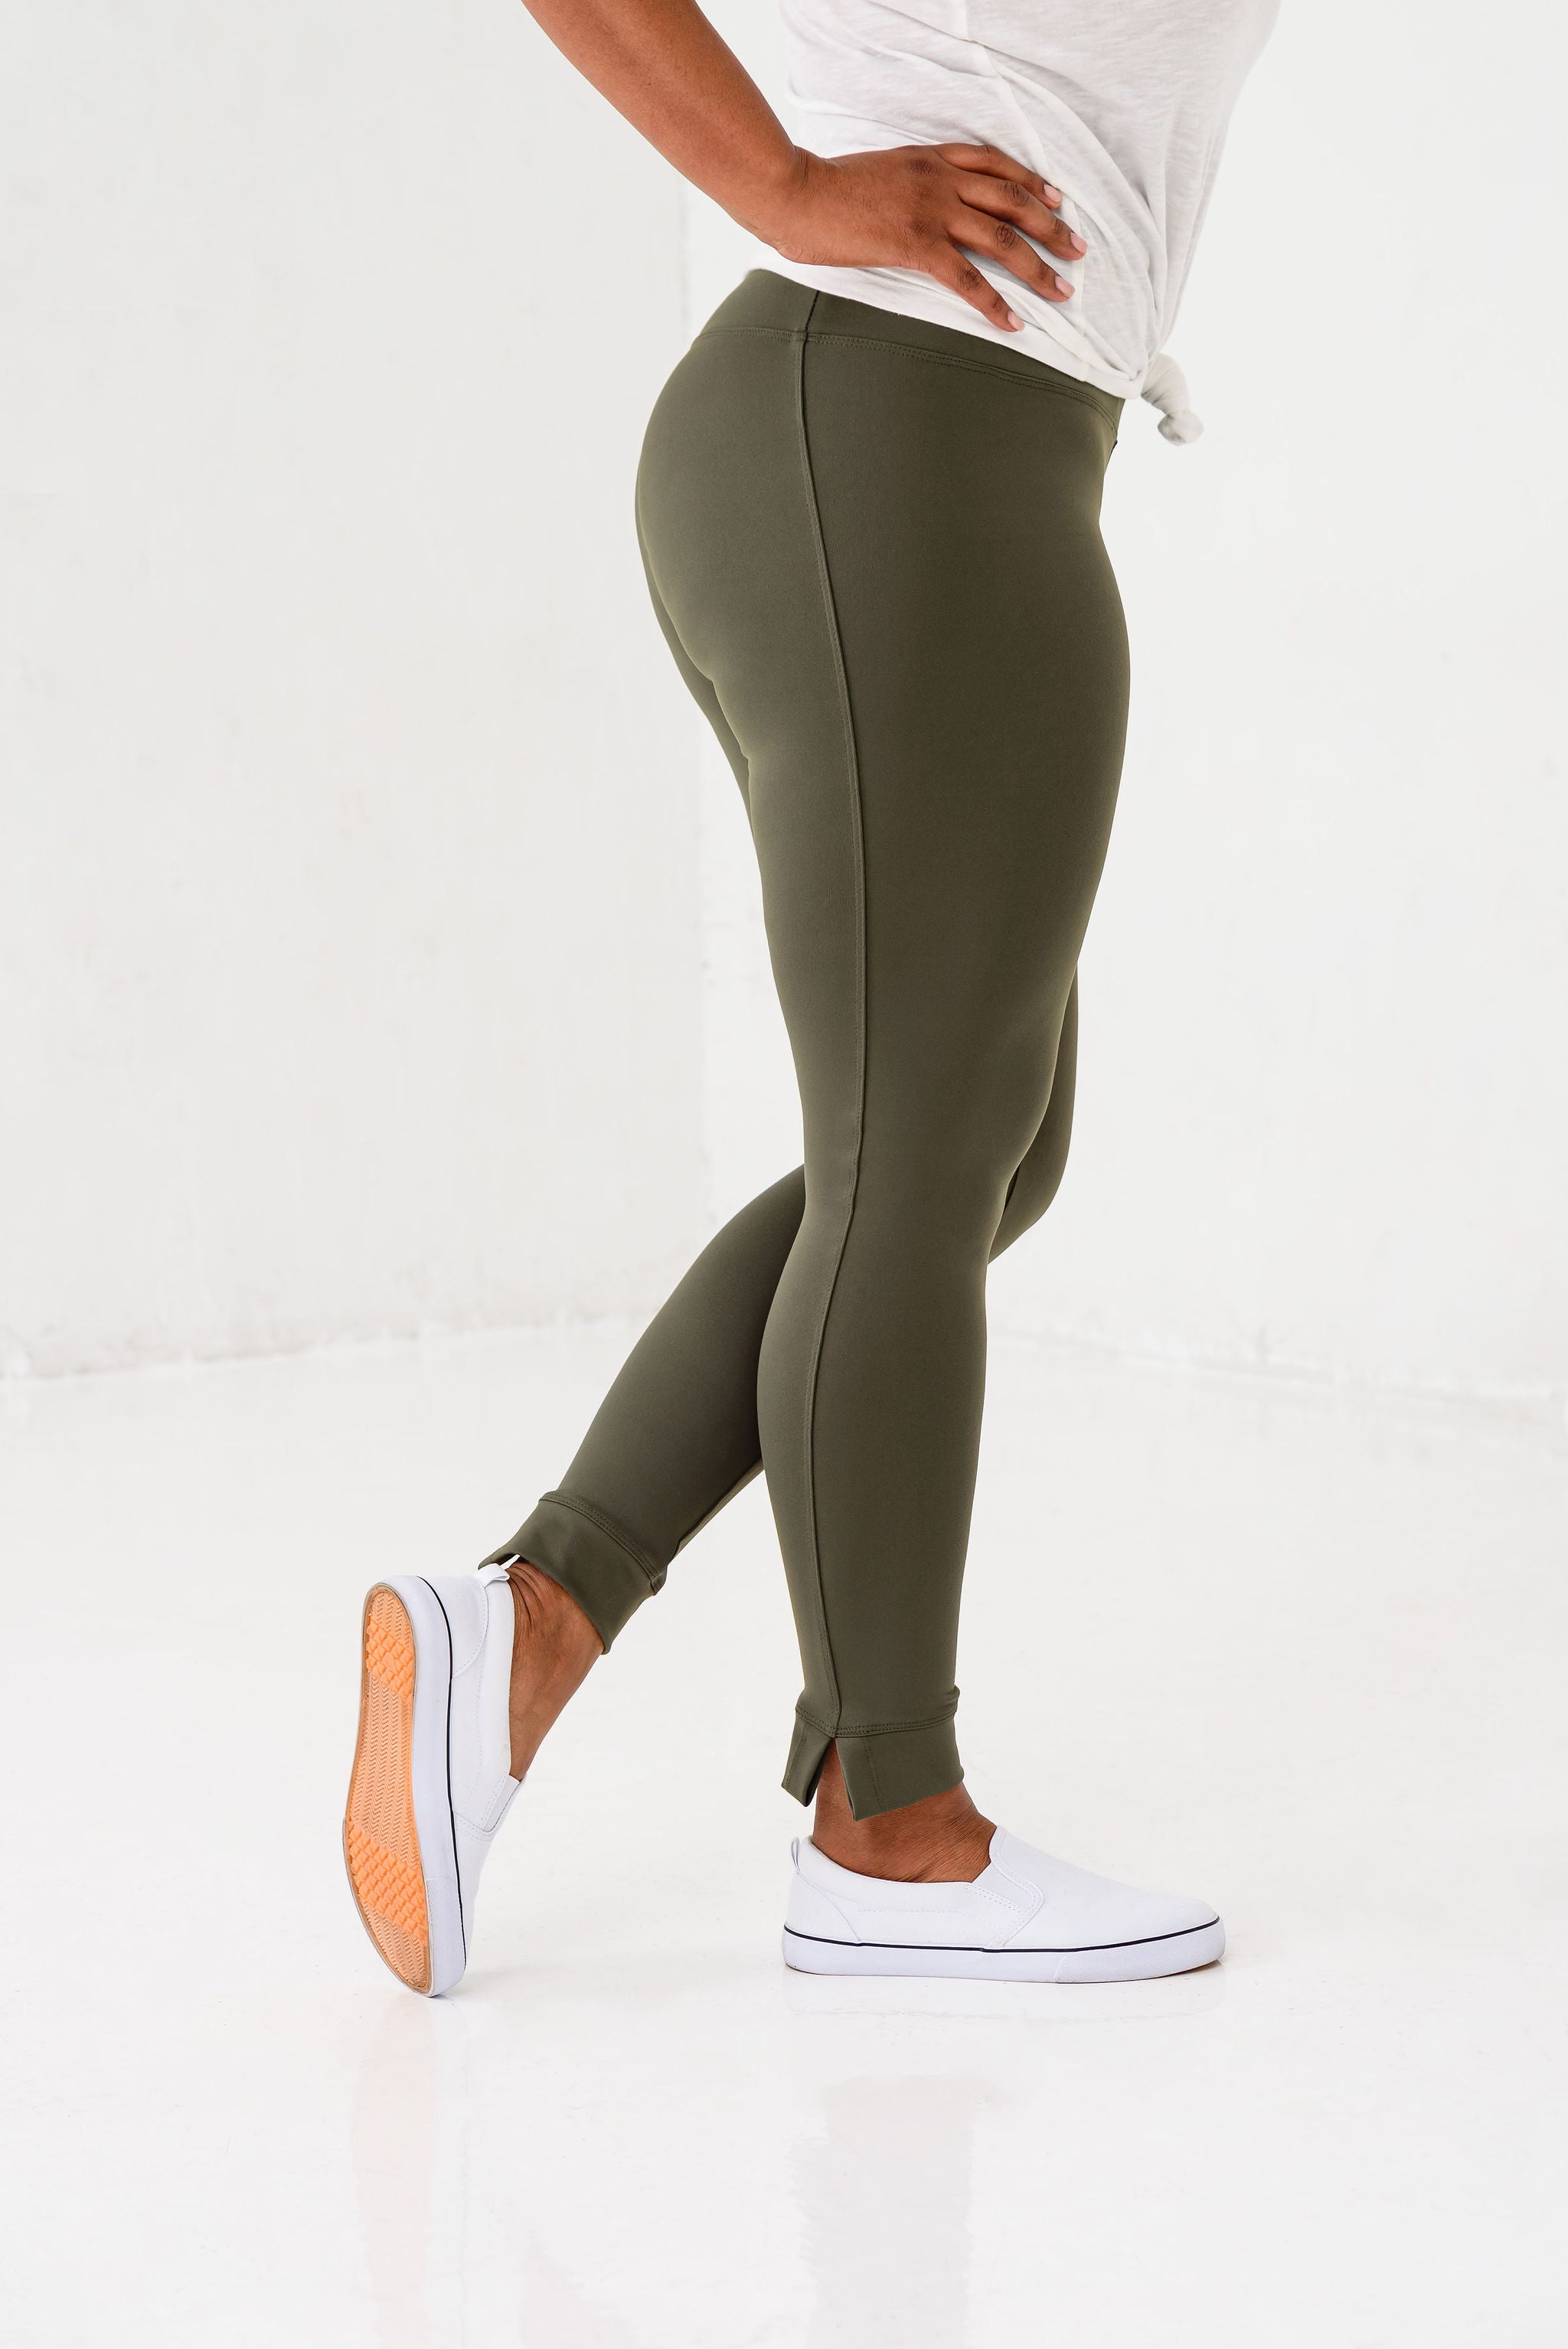 Improve Blood Circulation and Lift The Booty with these High Tech Leggings  - PaSH Magazine